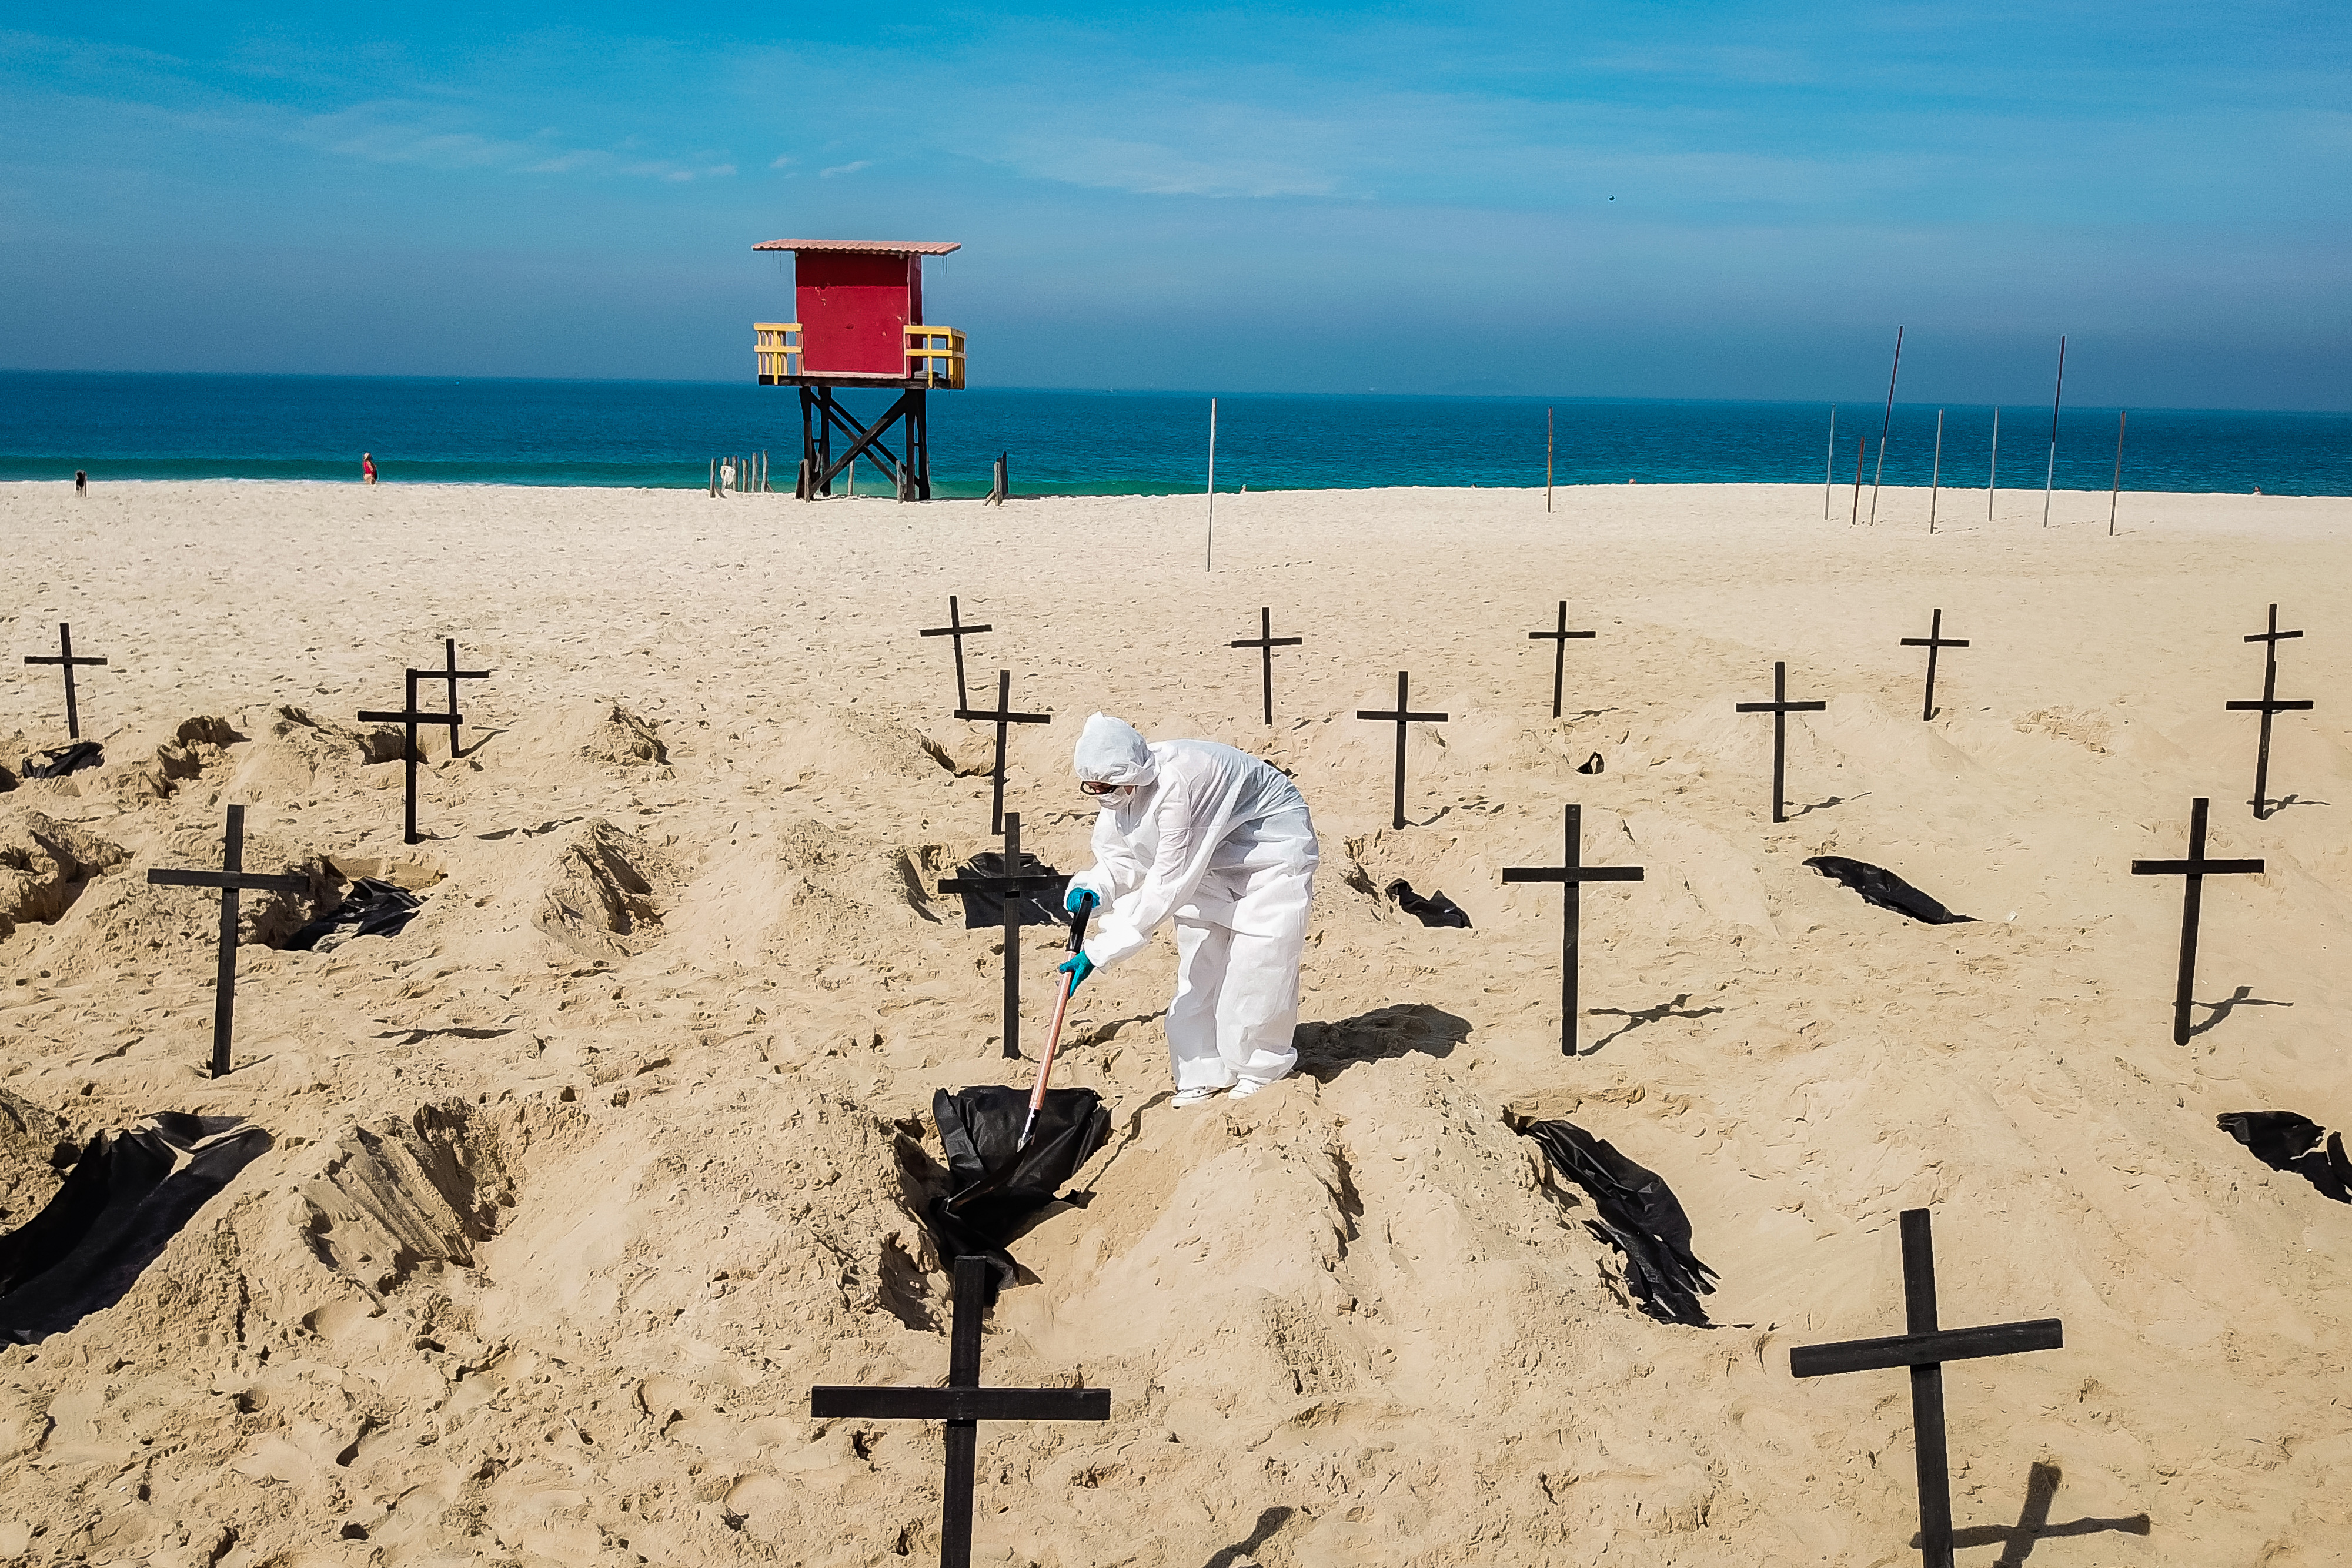 Protesters from the NGO 'Rio De Paz' dig symbolic graves as a sign of protest in Copacabana beach in Rio de Janeiro, Brazil. Volunteers dug 100 shallow graves symbolising the deaths of coronavirus in the country. The act calls for transparency and an attitude change from the government to fight the pandemic. 